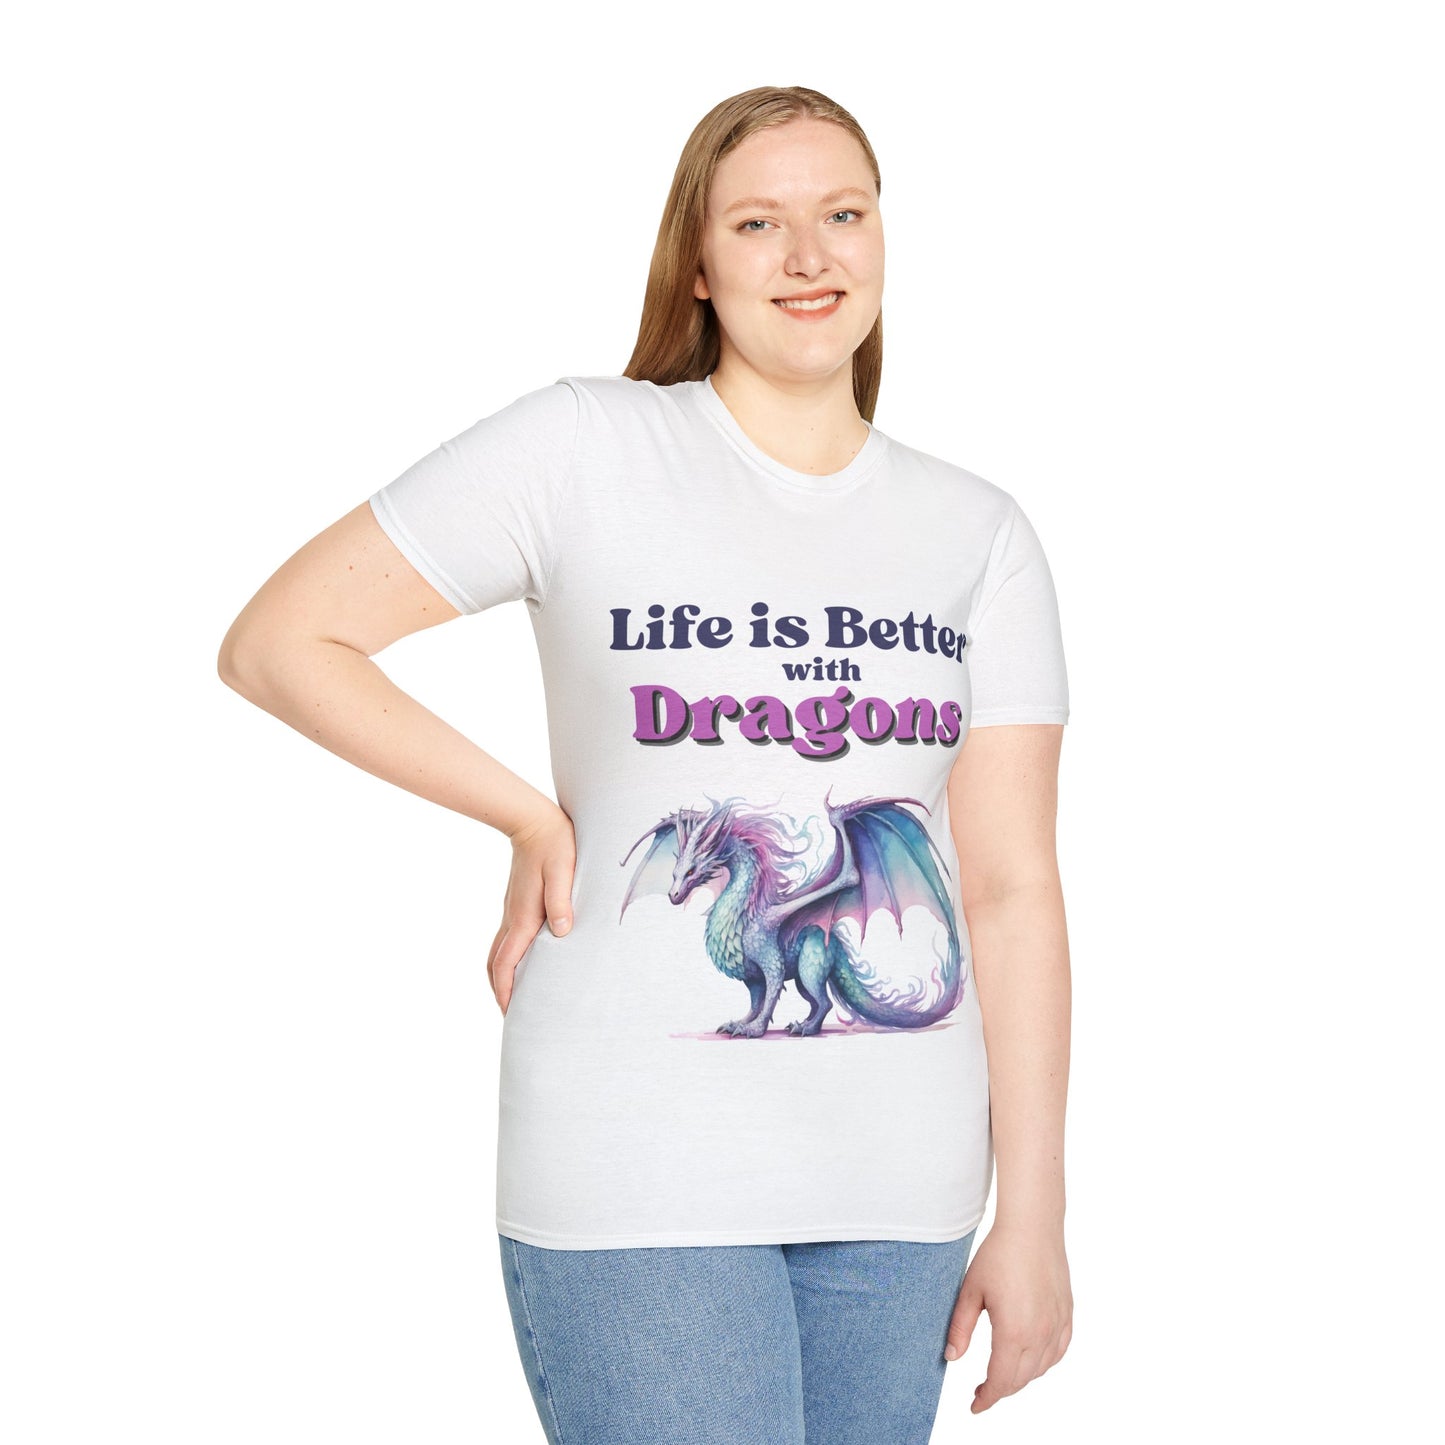 Life is Better with Dragons, Unisex Softstyle T-Shirt